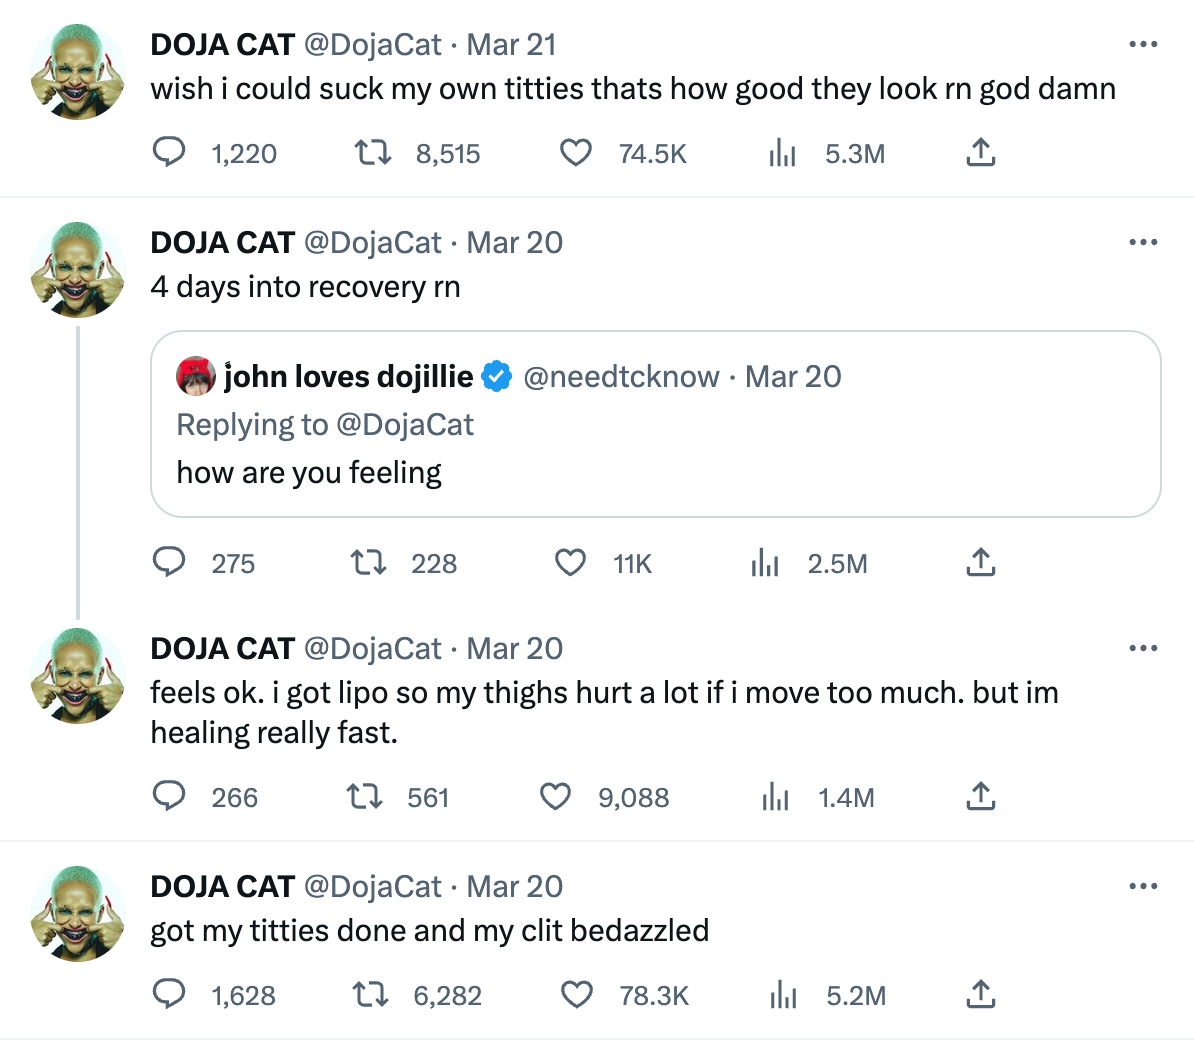 Doja Cat Is "Much Happier' With Natural Beauty Even Though She Got A Few Tweaks